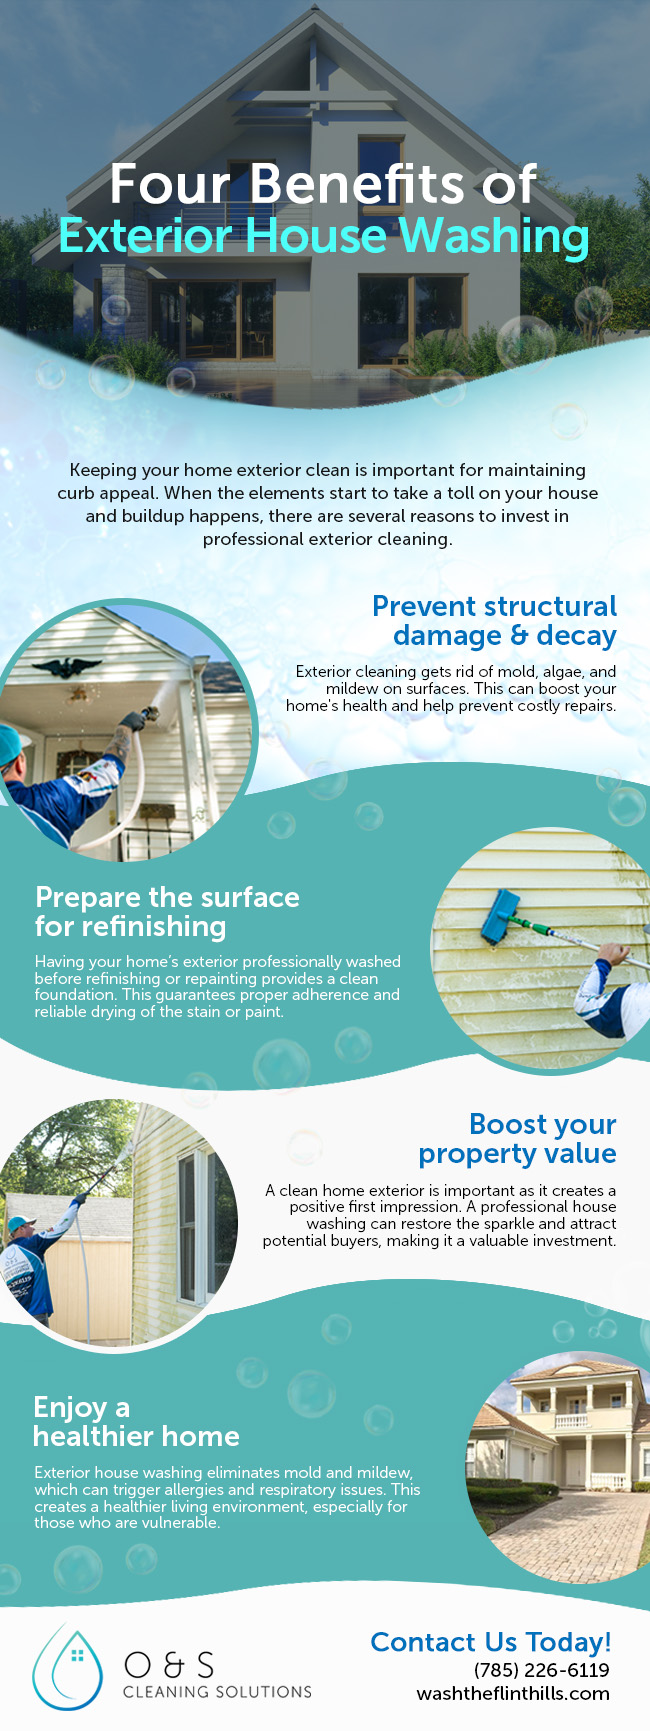 Exterior house washing has many benefits for your property.